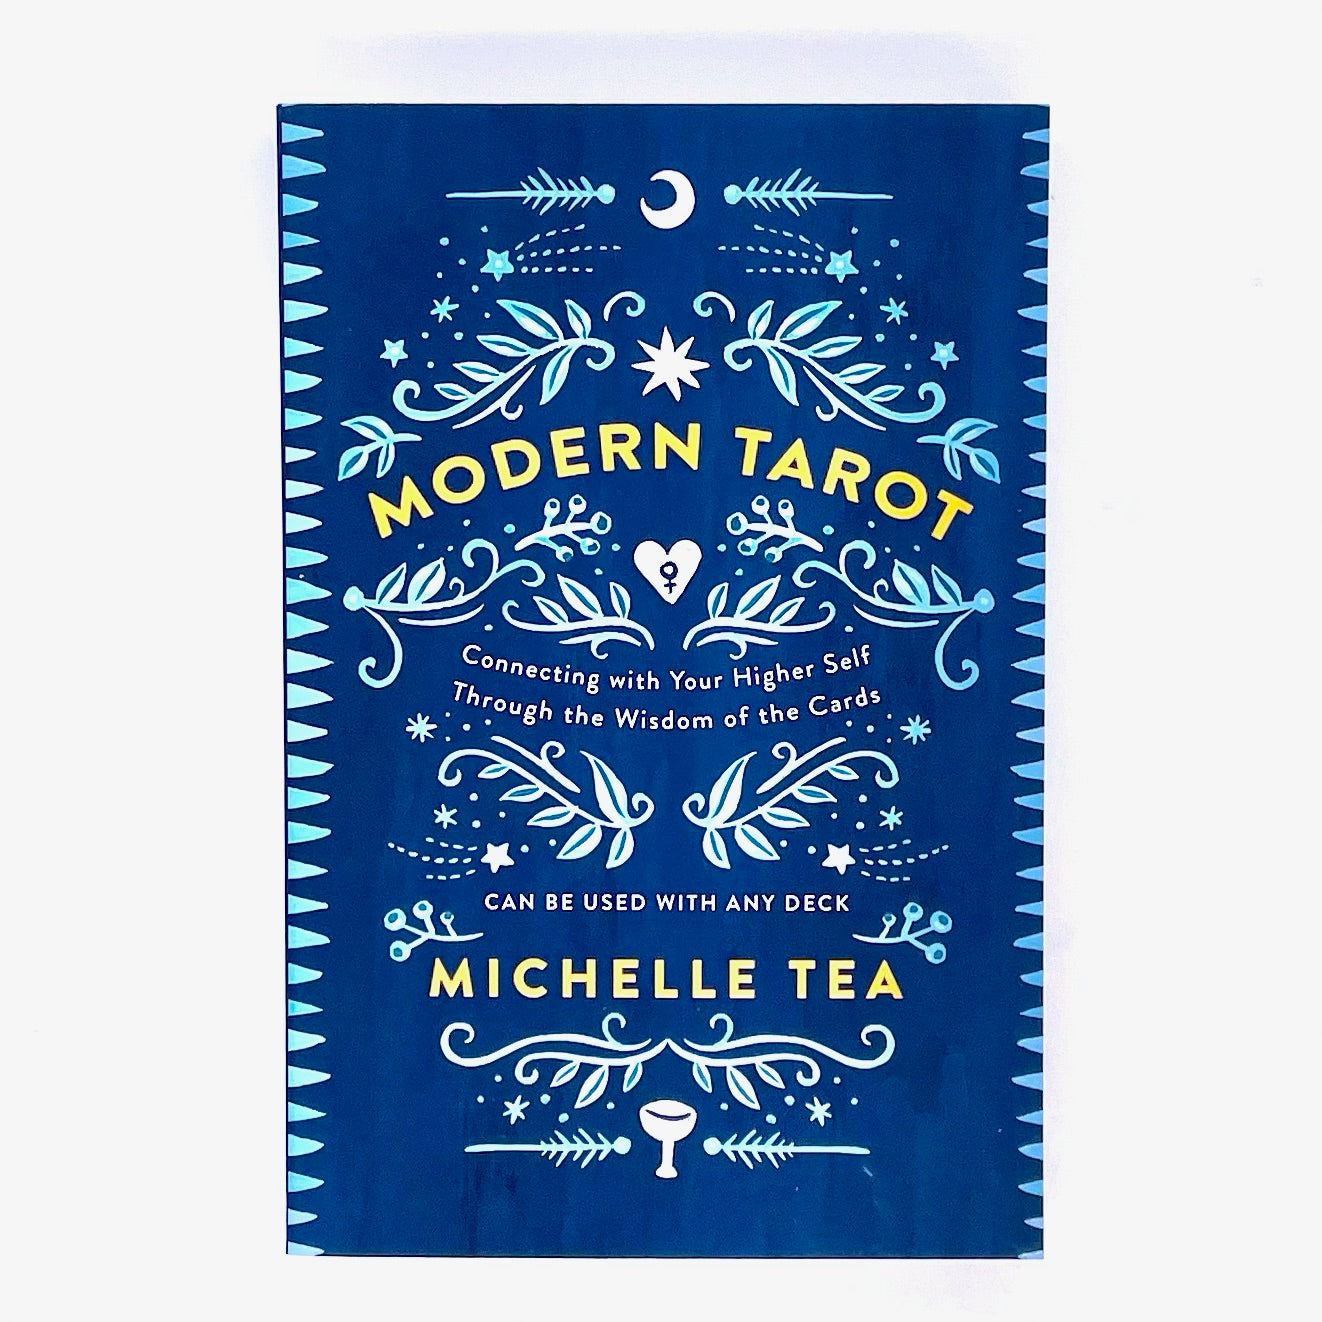 Book cover of Modern Tarot by Michelle Tea.